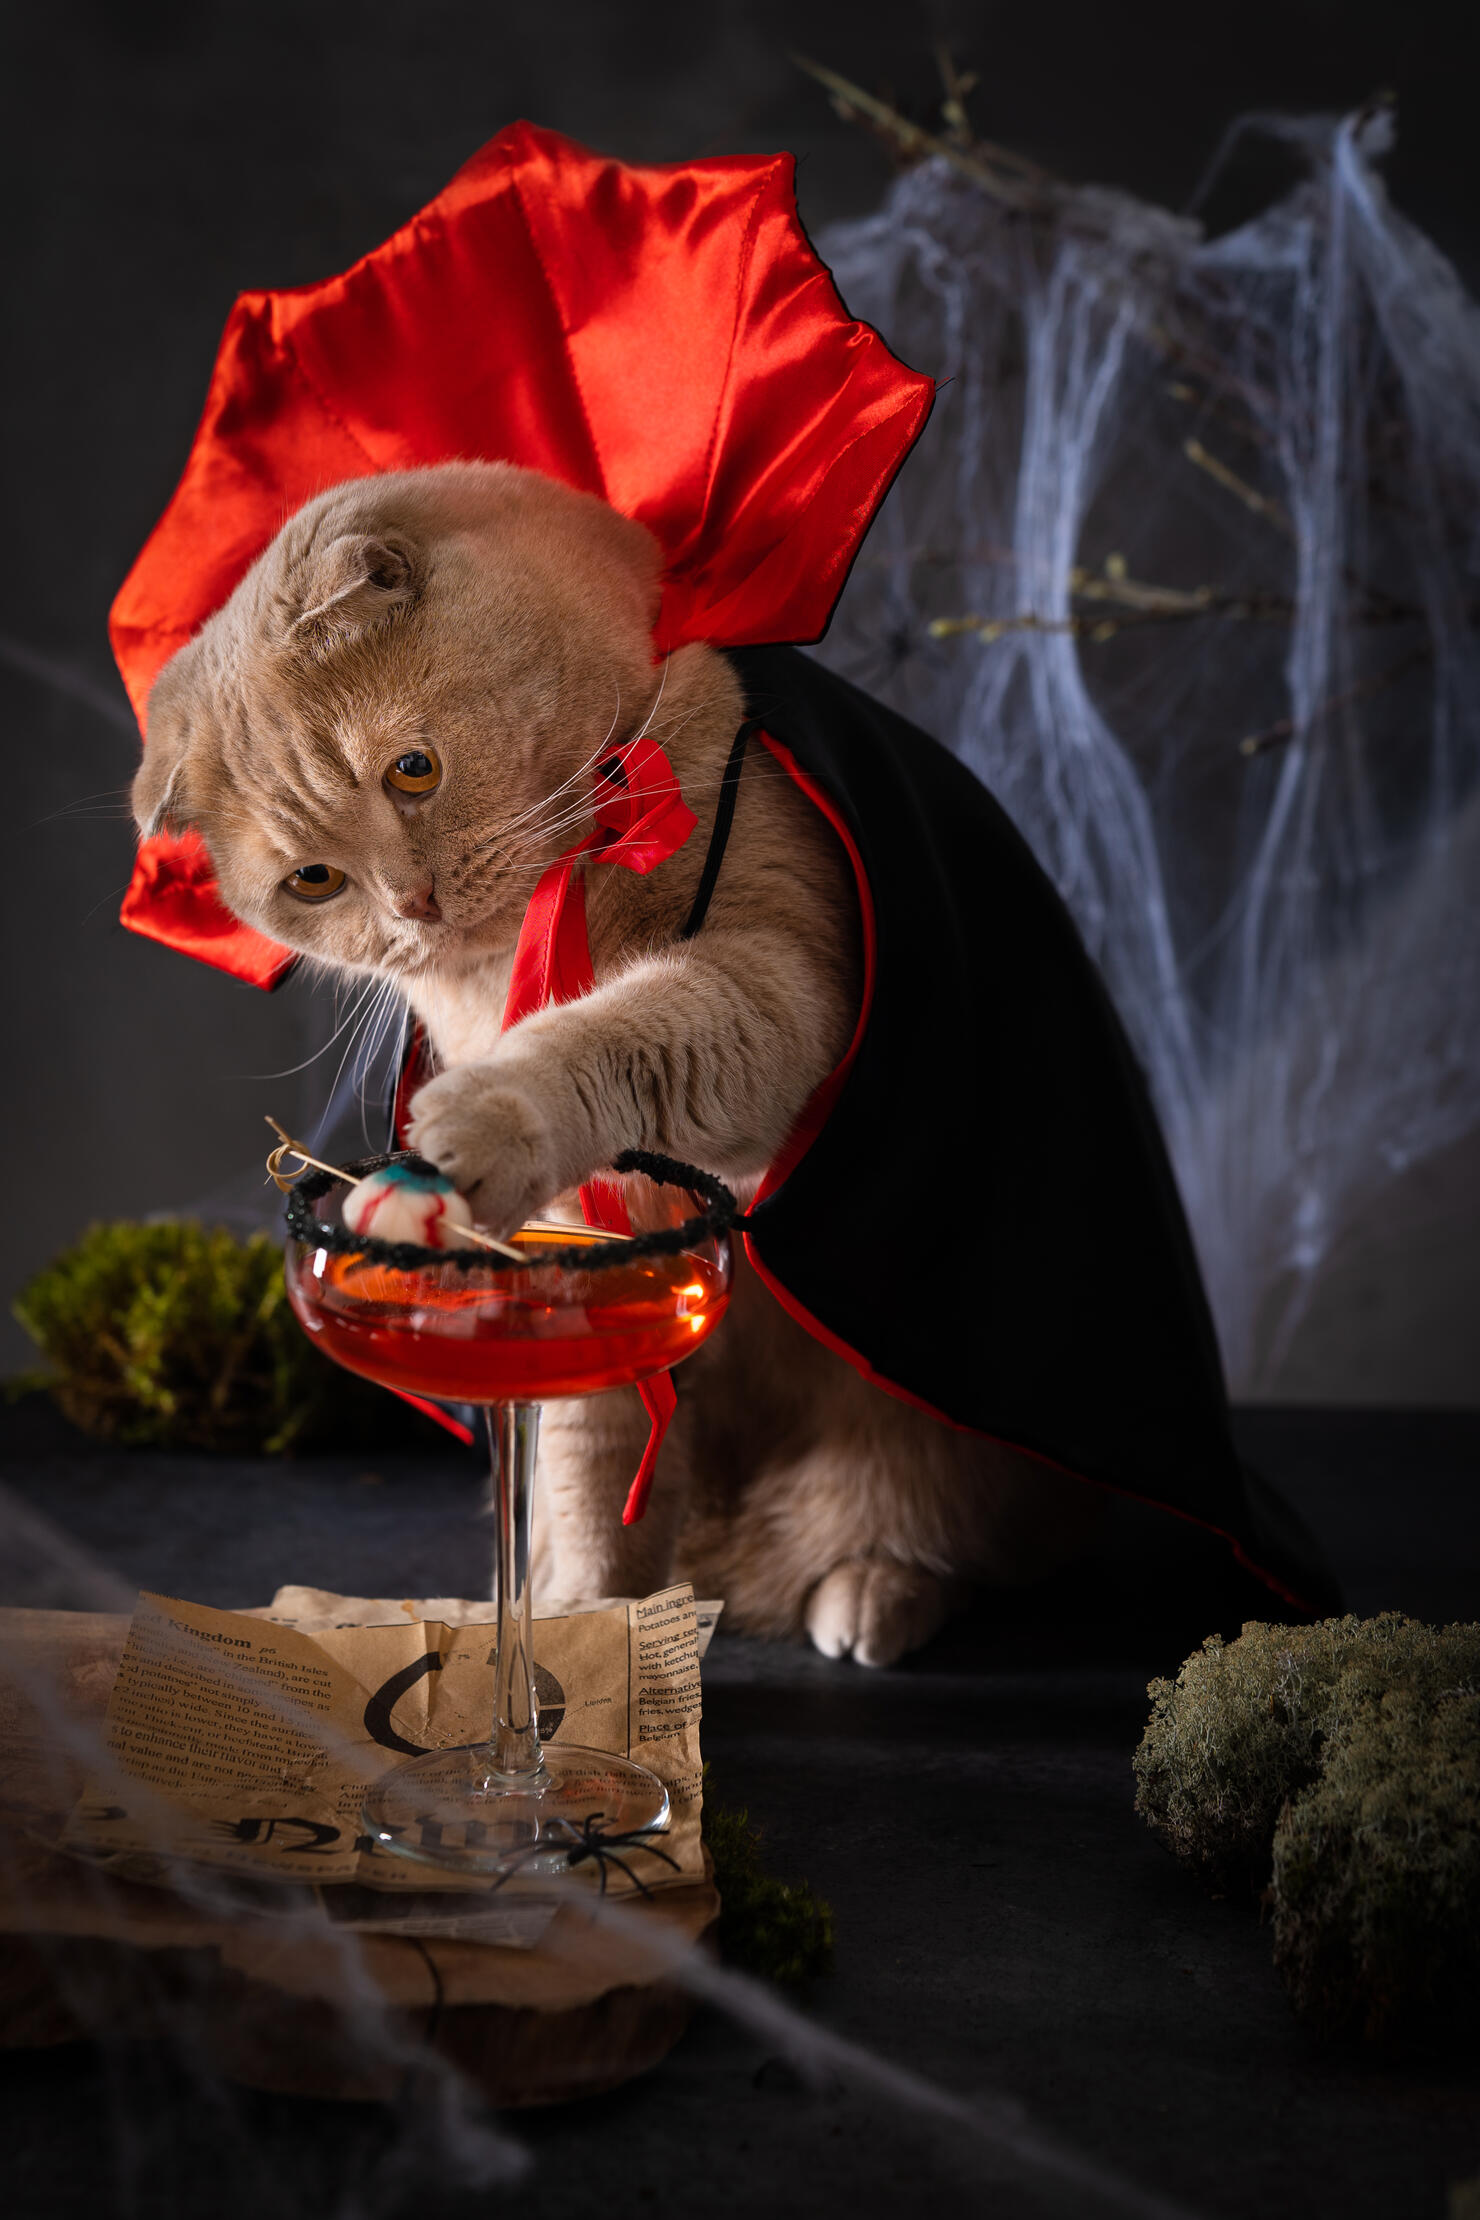 Dracula cat wearing vampire costume and catching a jelly eye in bloody margarita cocktail on scary dark background. Halloween vampire party. Bar menu, recipe, festive poster, Greeting card